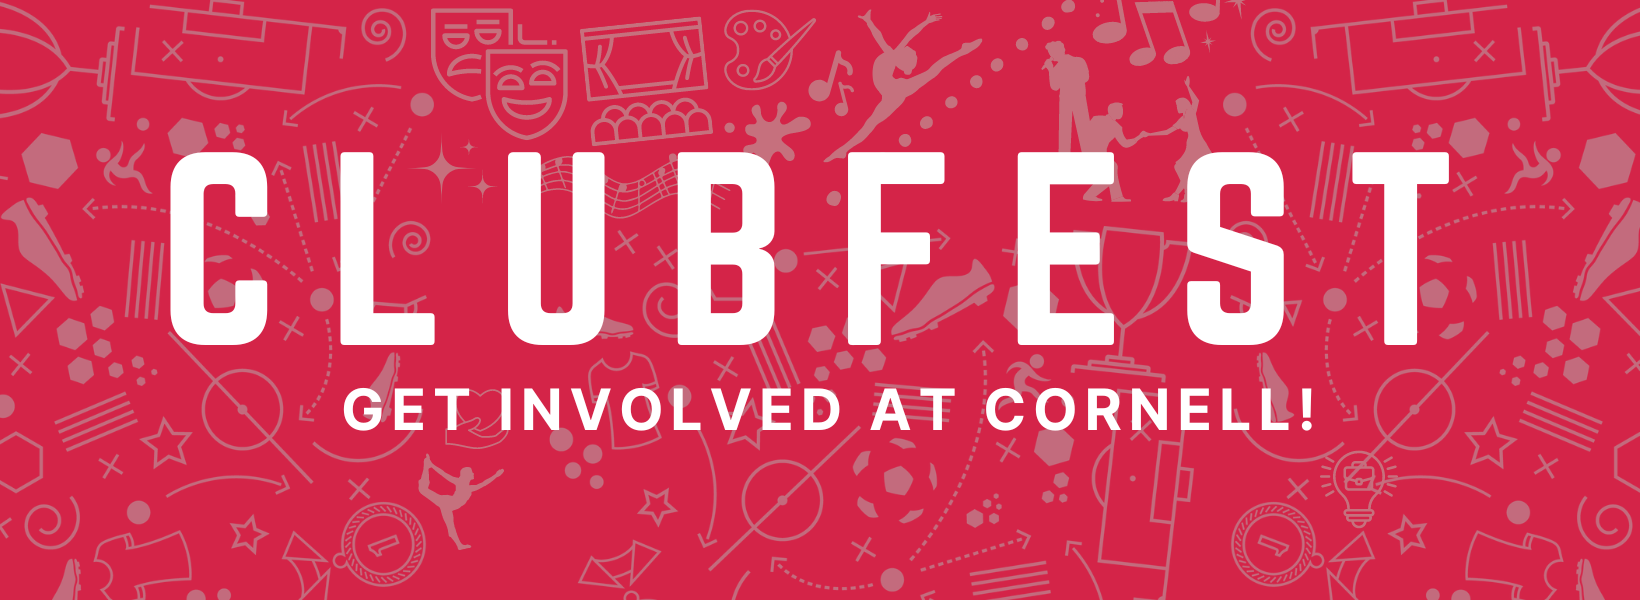 Red background with various activity icons: dancing, sports, food, the arts, and more. Text: ClubFest - Get Involved at Cornell!